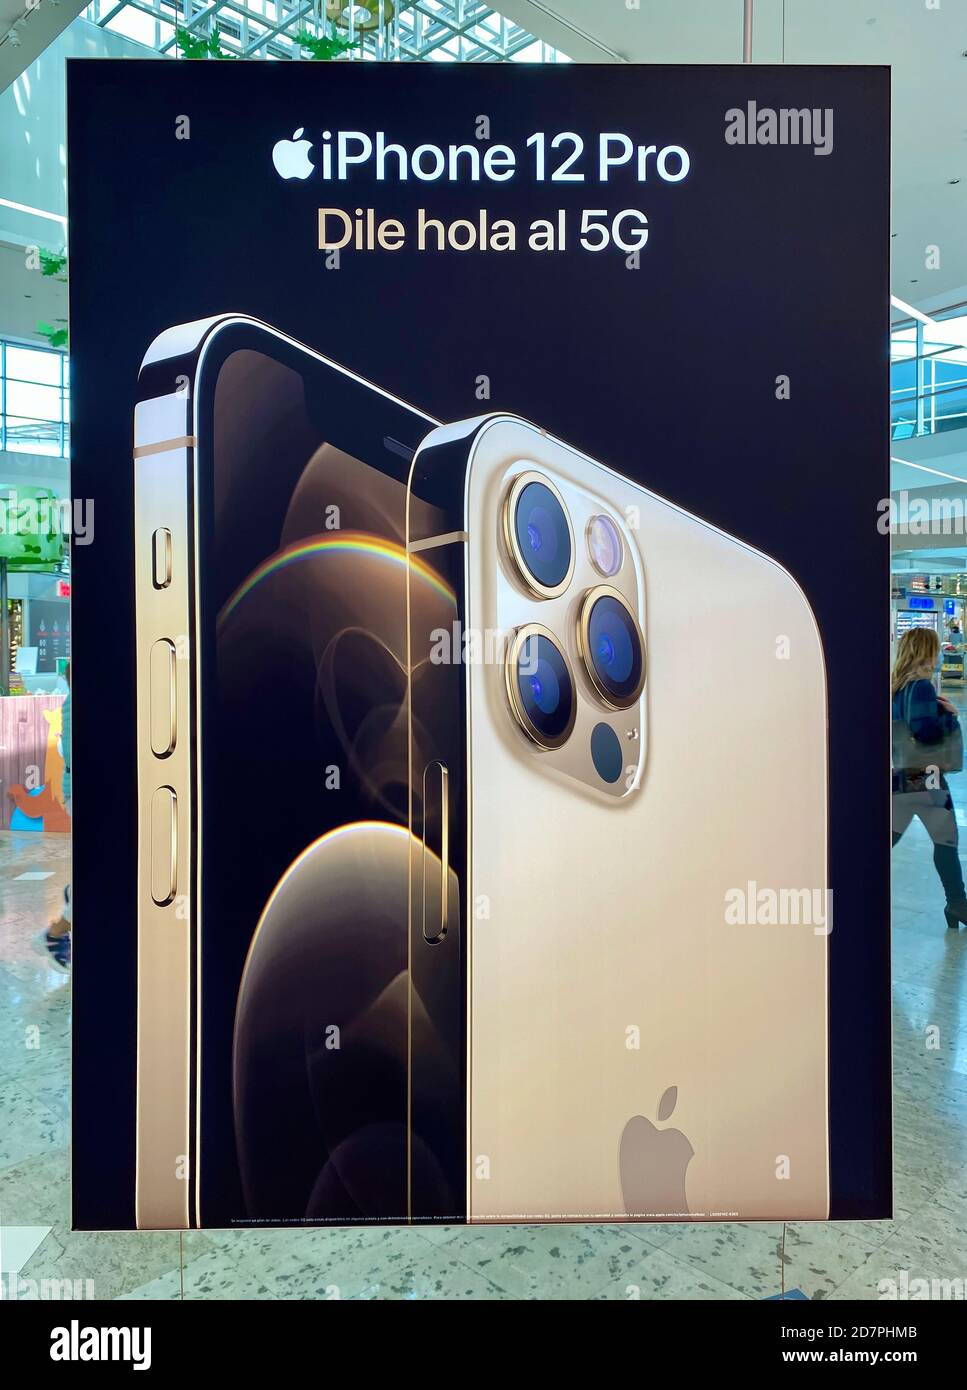 Oviedo Spain October 24 Advertising Poster On An App Store Announcing The Iphone 12 Pro Stock Photo Alamy